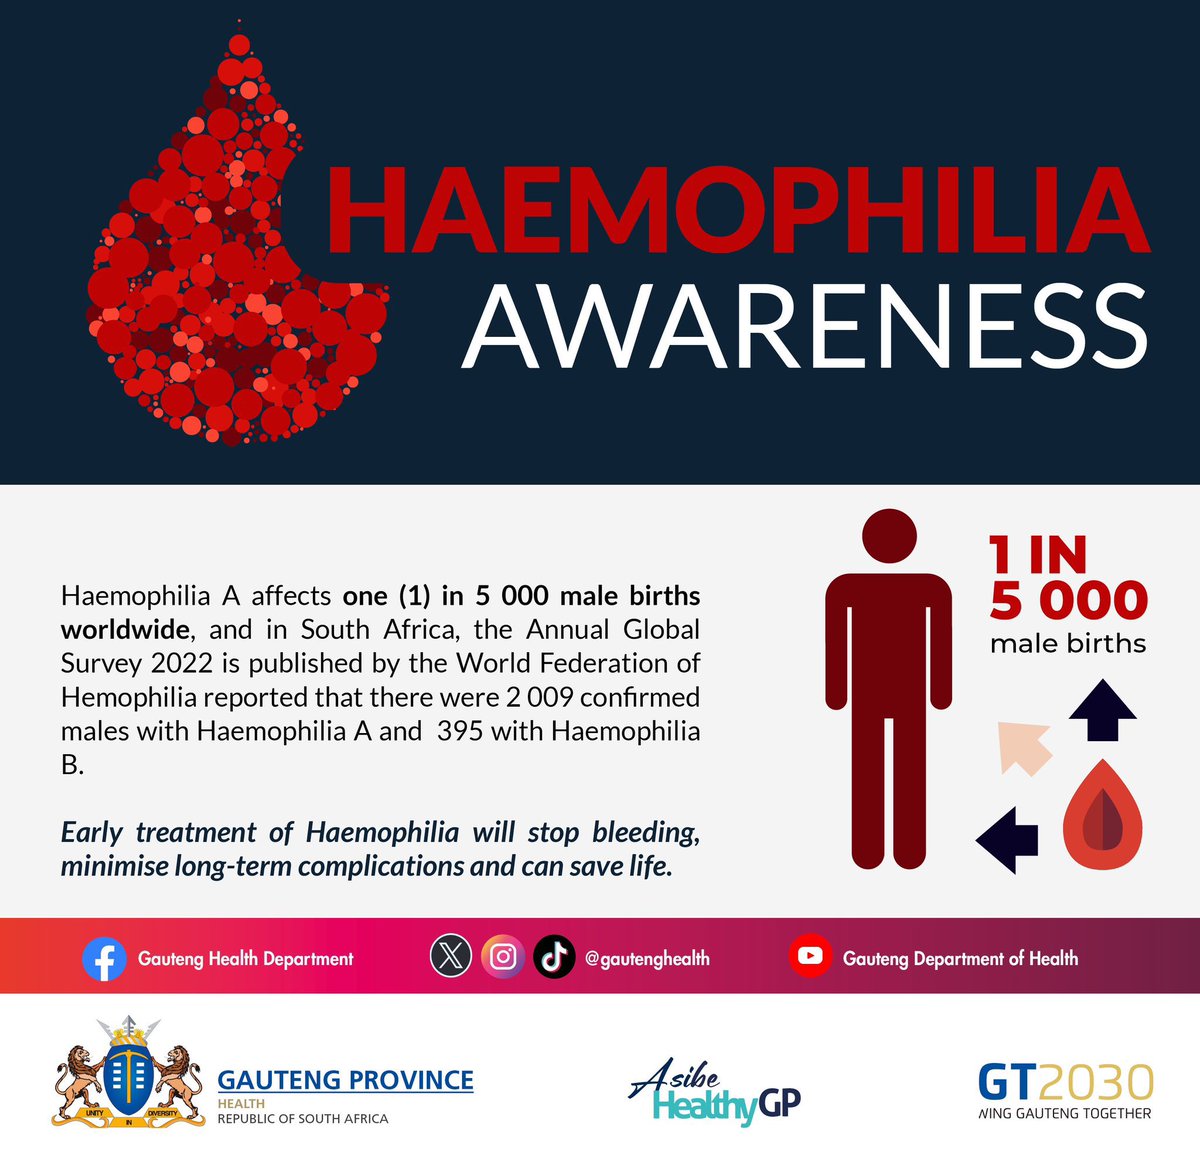 There are two types of the Haemophilia, Haemophilia A which is the most common and is due to a deficiency of clotting factor VIII (8) and Haemophilia which is due to a deficiency in factor IX (9) #WorldHaemophiliaDay #AsibeHealthyGP